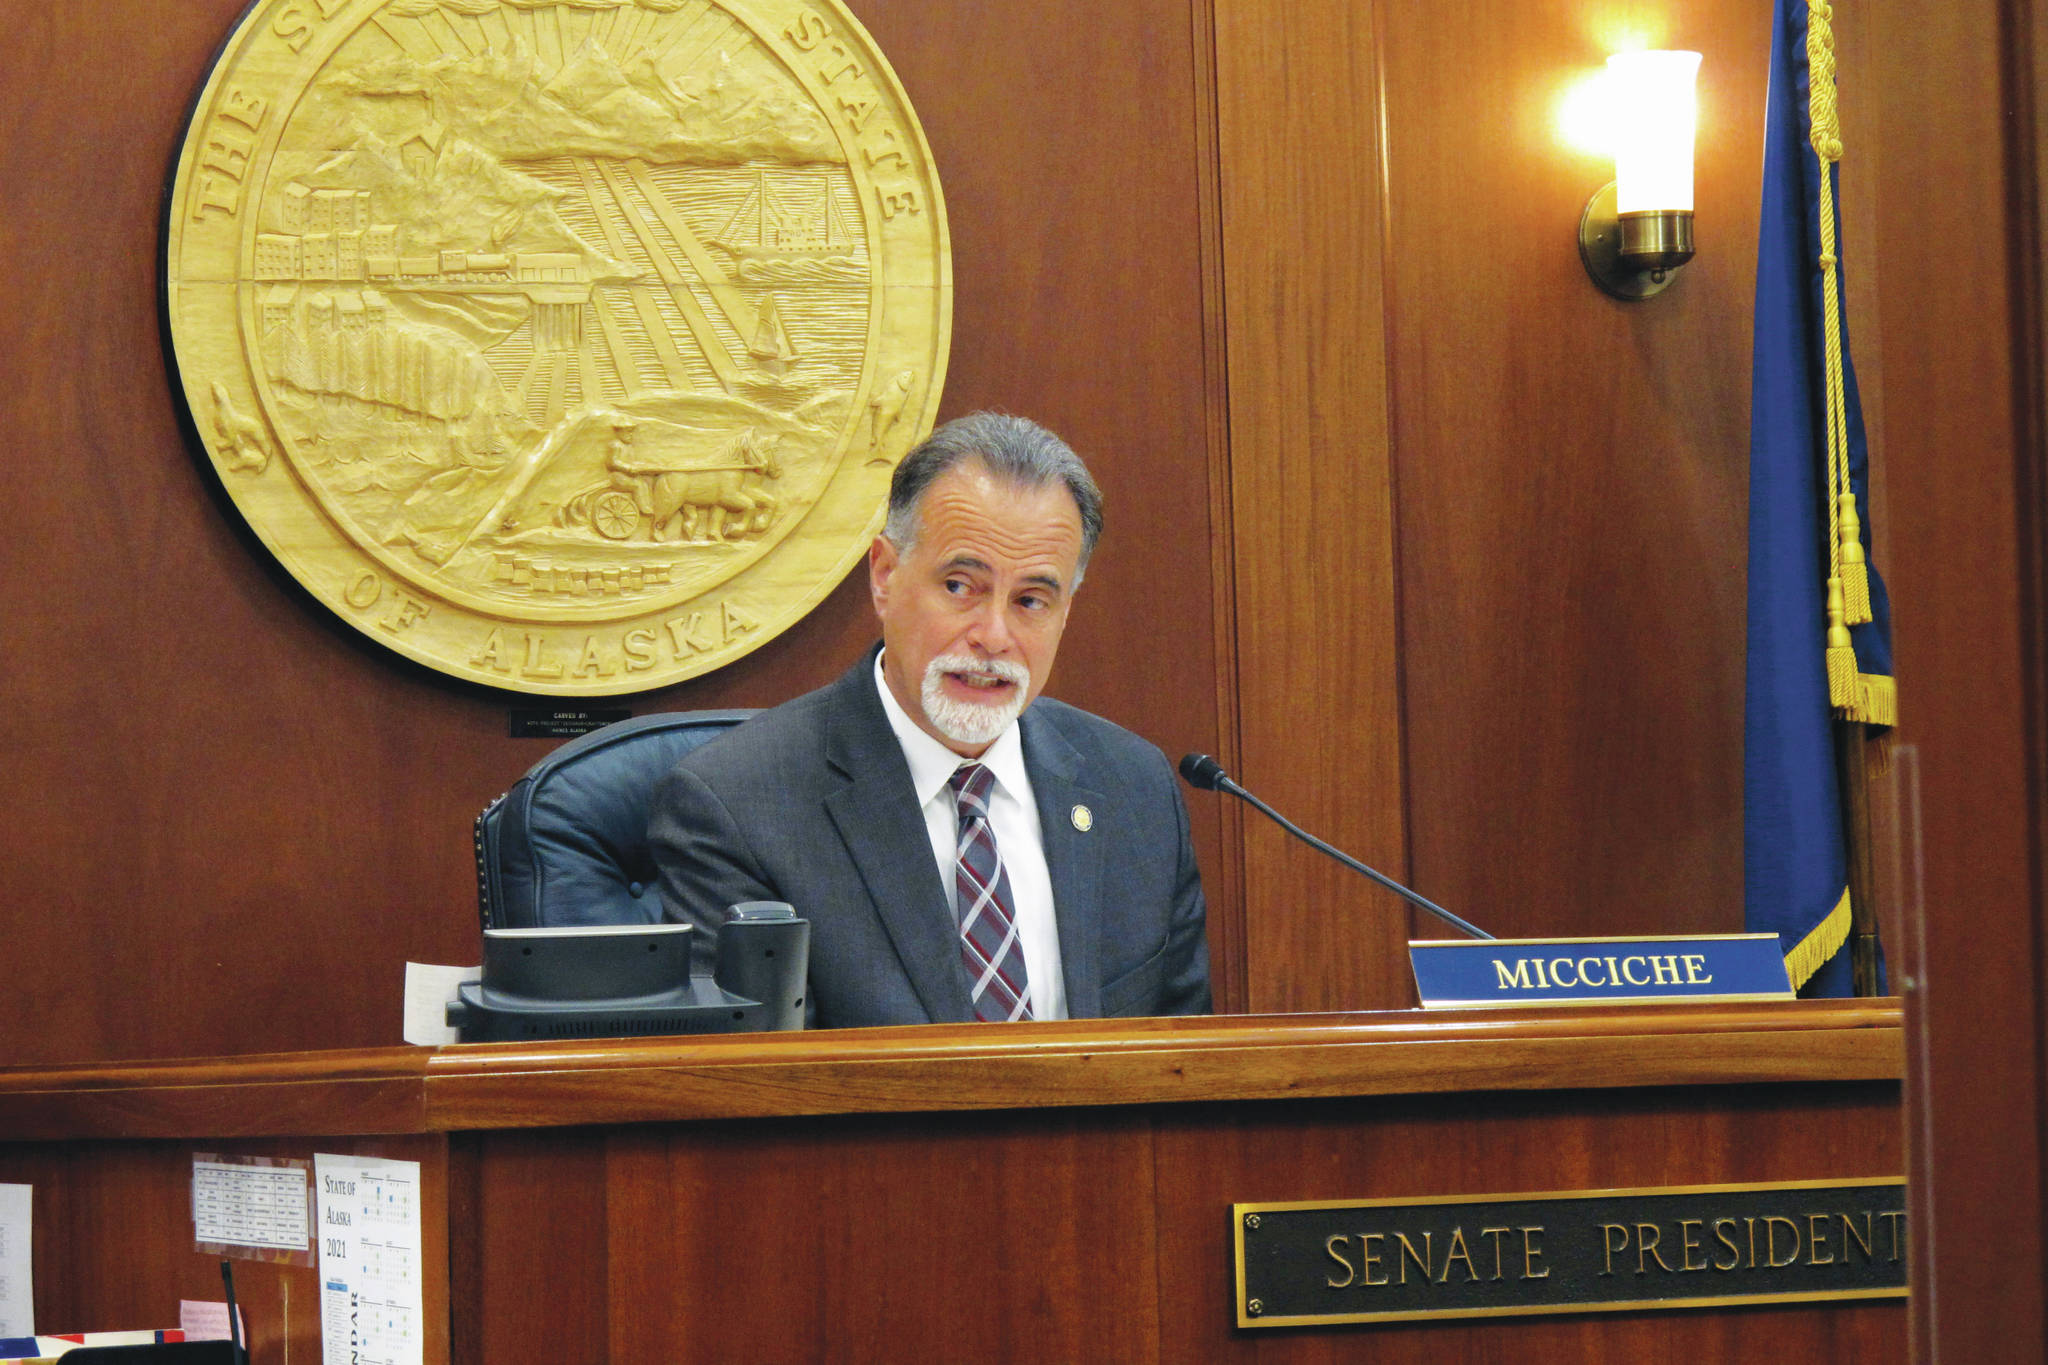 Alaska Senate President Peter Micciche prepares for the start of a brief Senate floor session on Tuesday, June 15, 2021, in Juneau, Alaska. Lawmakers were trying to reach resolution on a state spending package during the special legislative session. (AP Photo/Becky Bohrer)